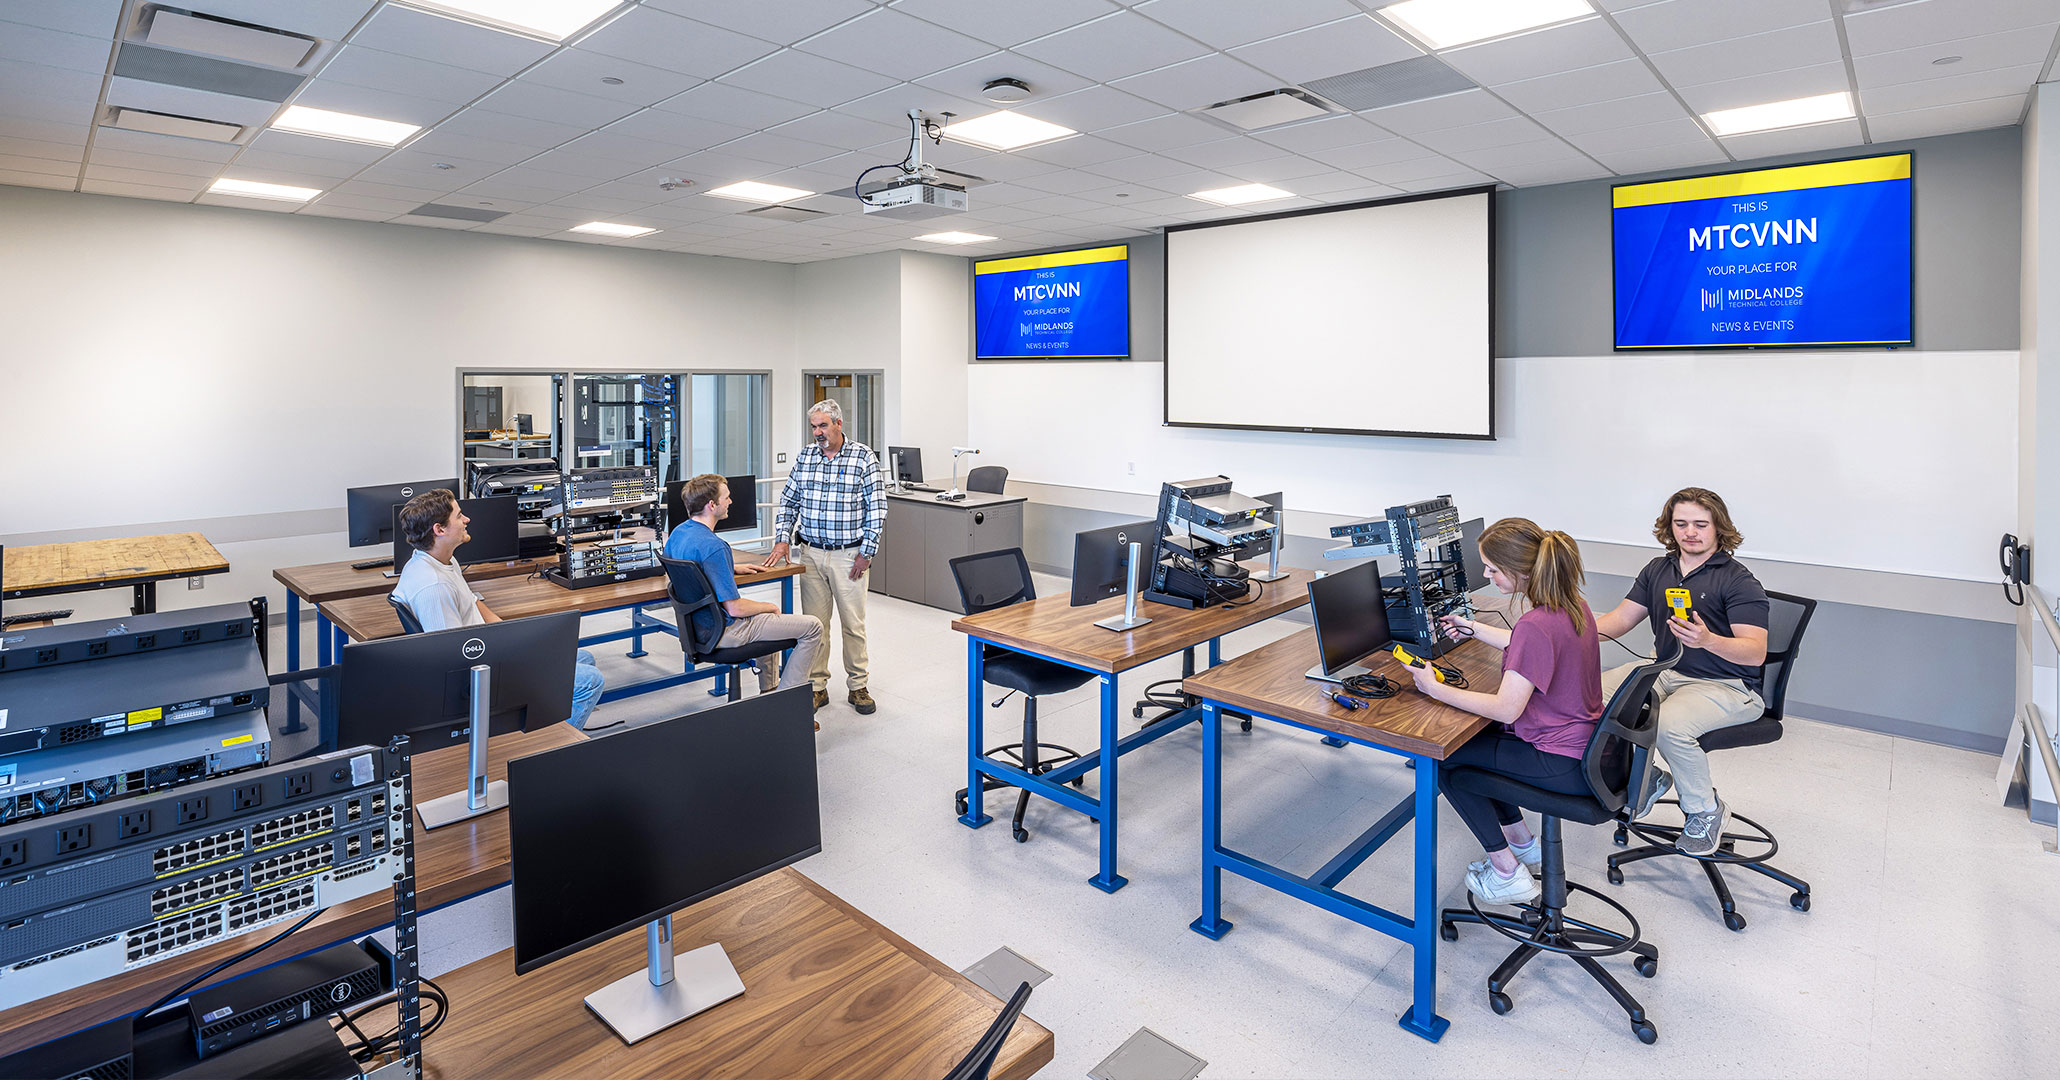 BOUDREAUX architects designed classroom spaces for students to engage fully with their professors